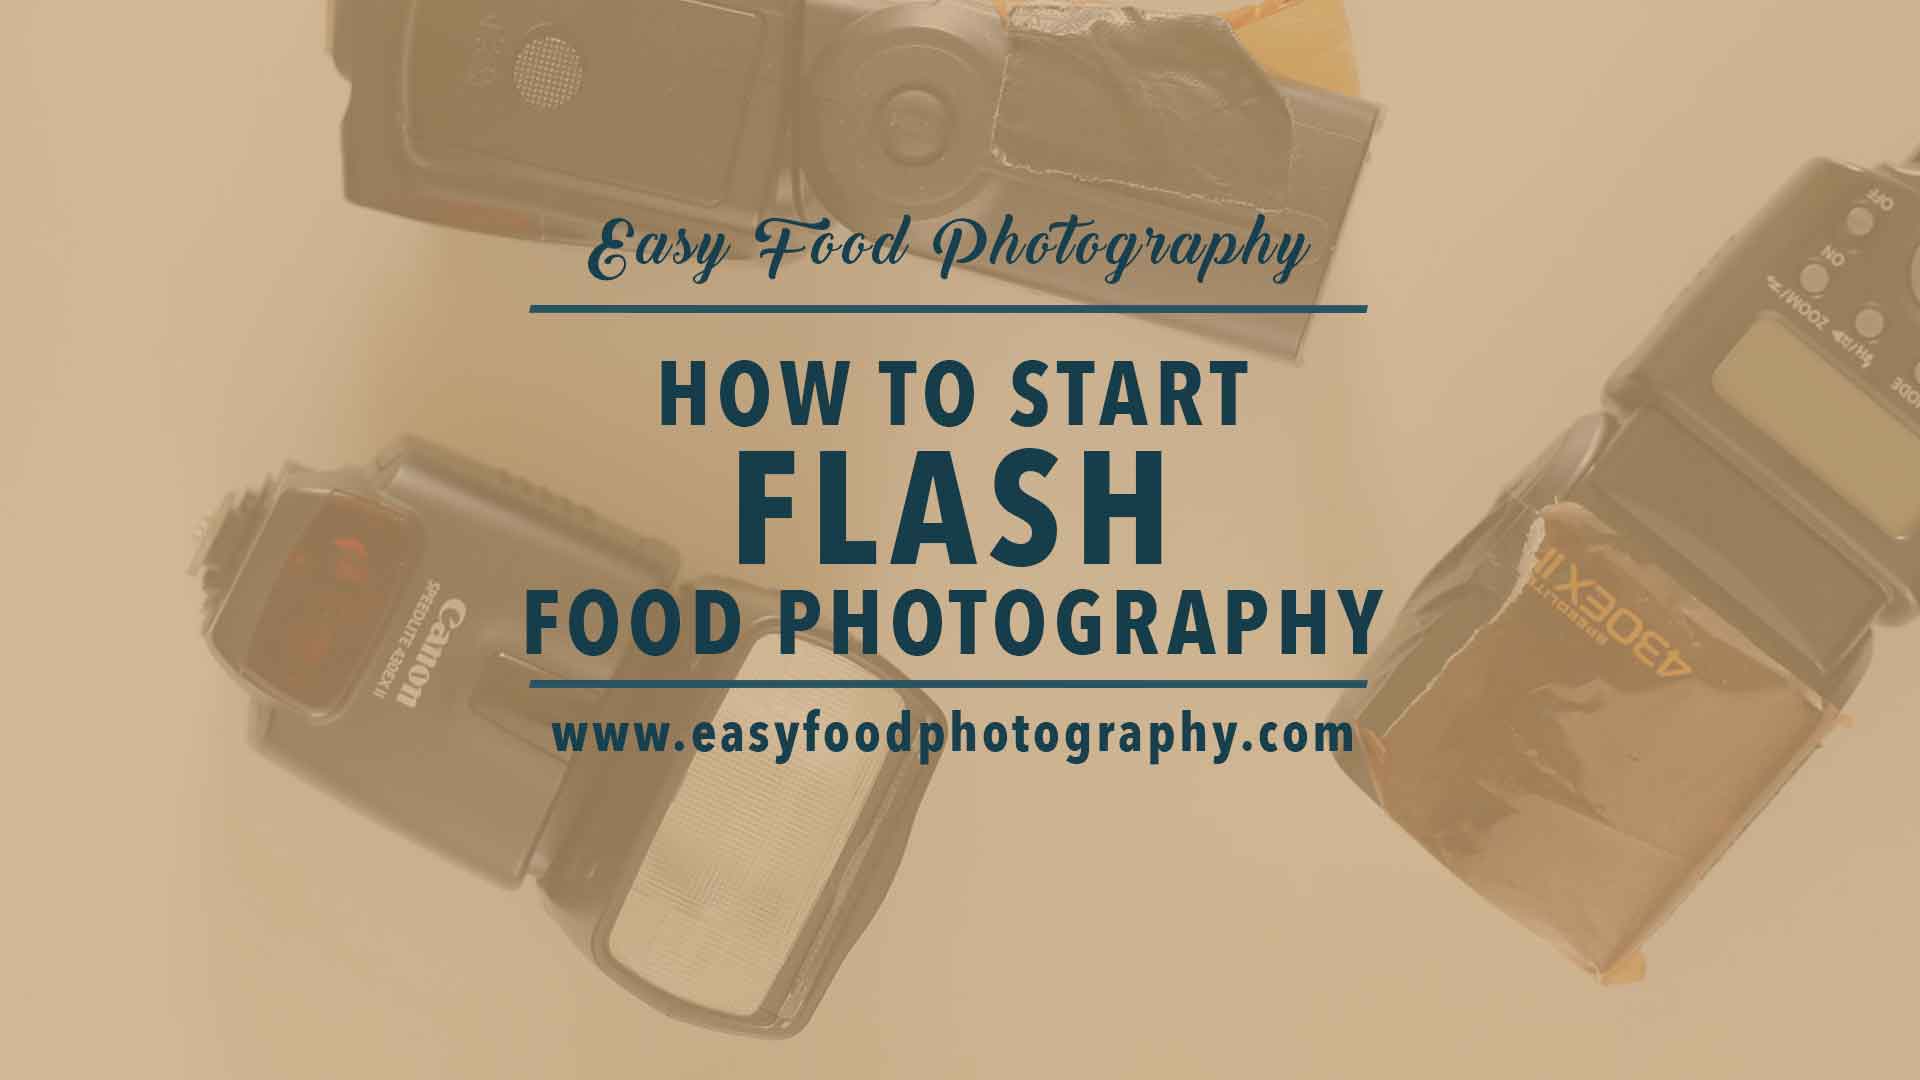 How to start flash food photography